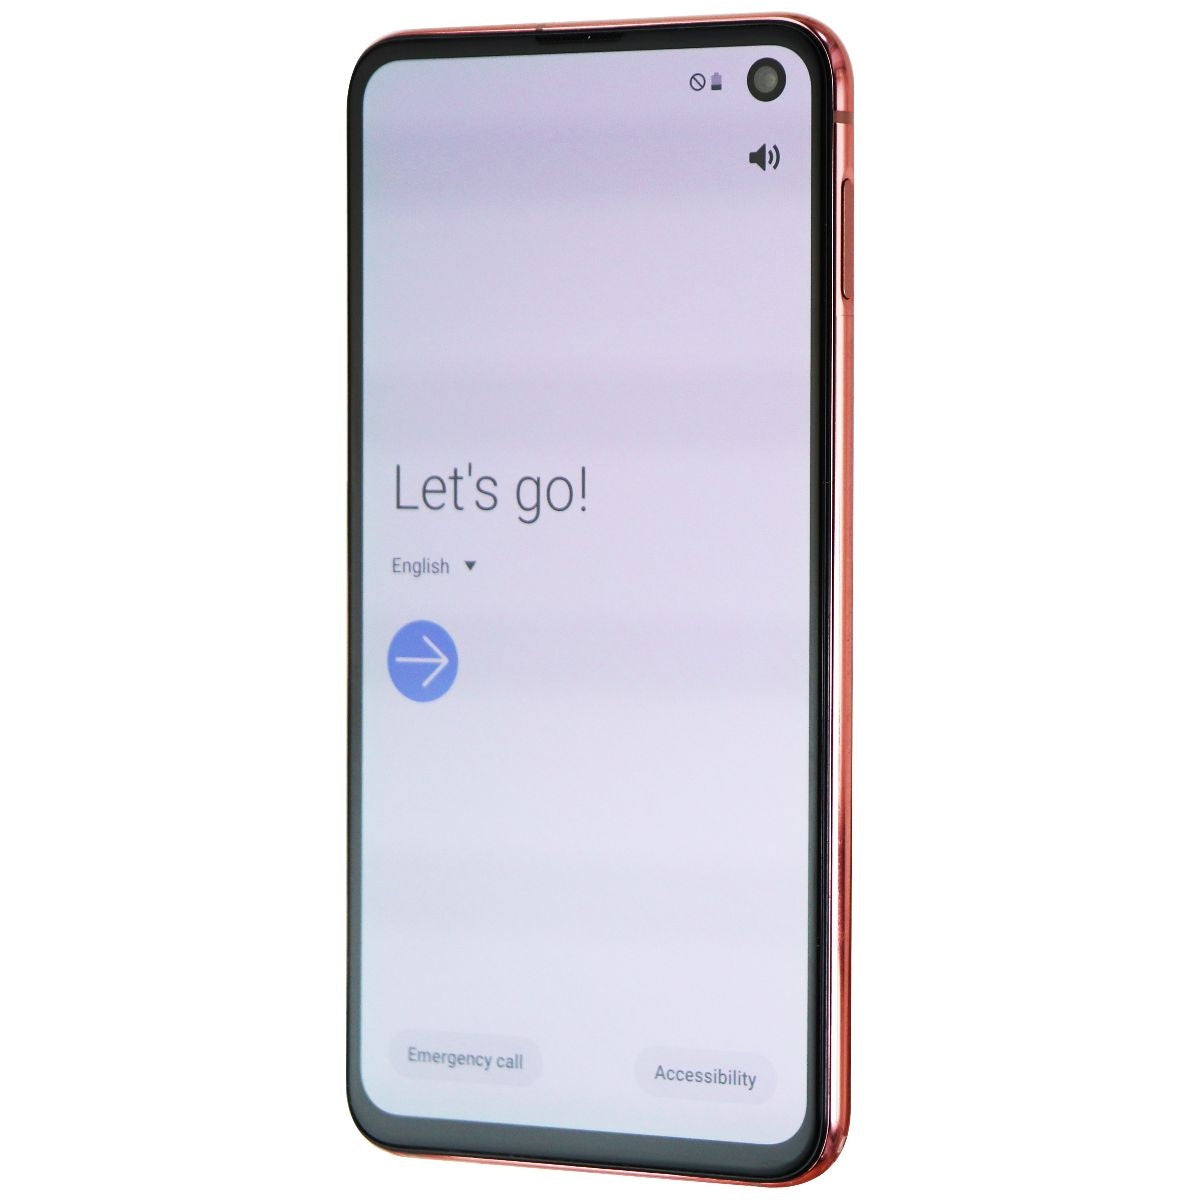 Samsung Galaxy S10e (5.8-in) Smartphone (SM-G970U) Unlocked 128GB/Flamingo Pink Cell Phones & Smartphones Samsung    - Simple Cell Bulk Wholesale Pricing - USA Seller